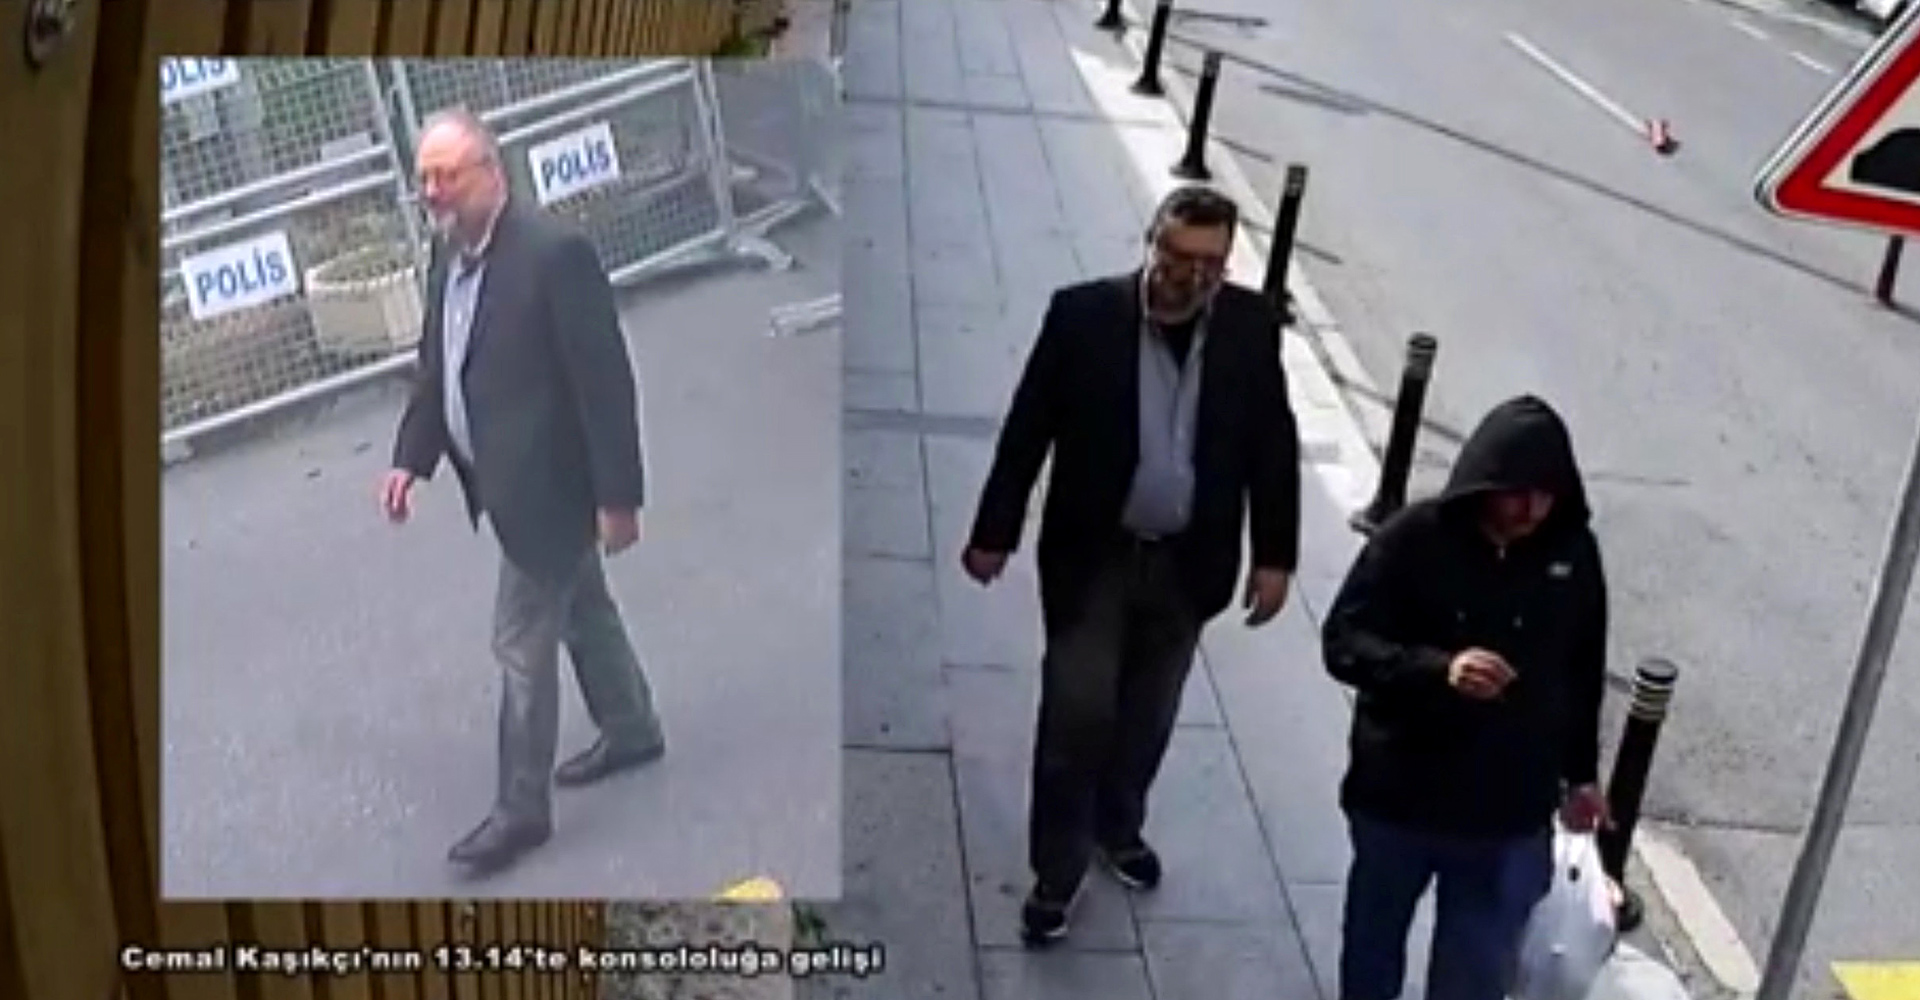 Jamal Khashoggi and a man dressed like him - except for the shoes